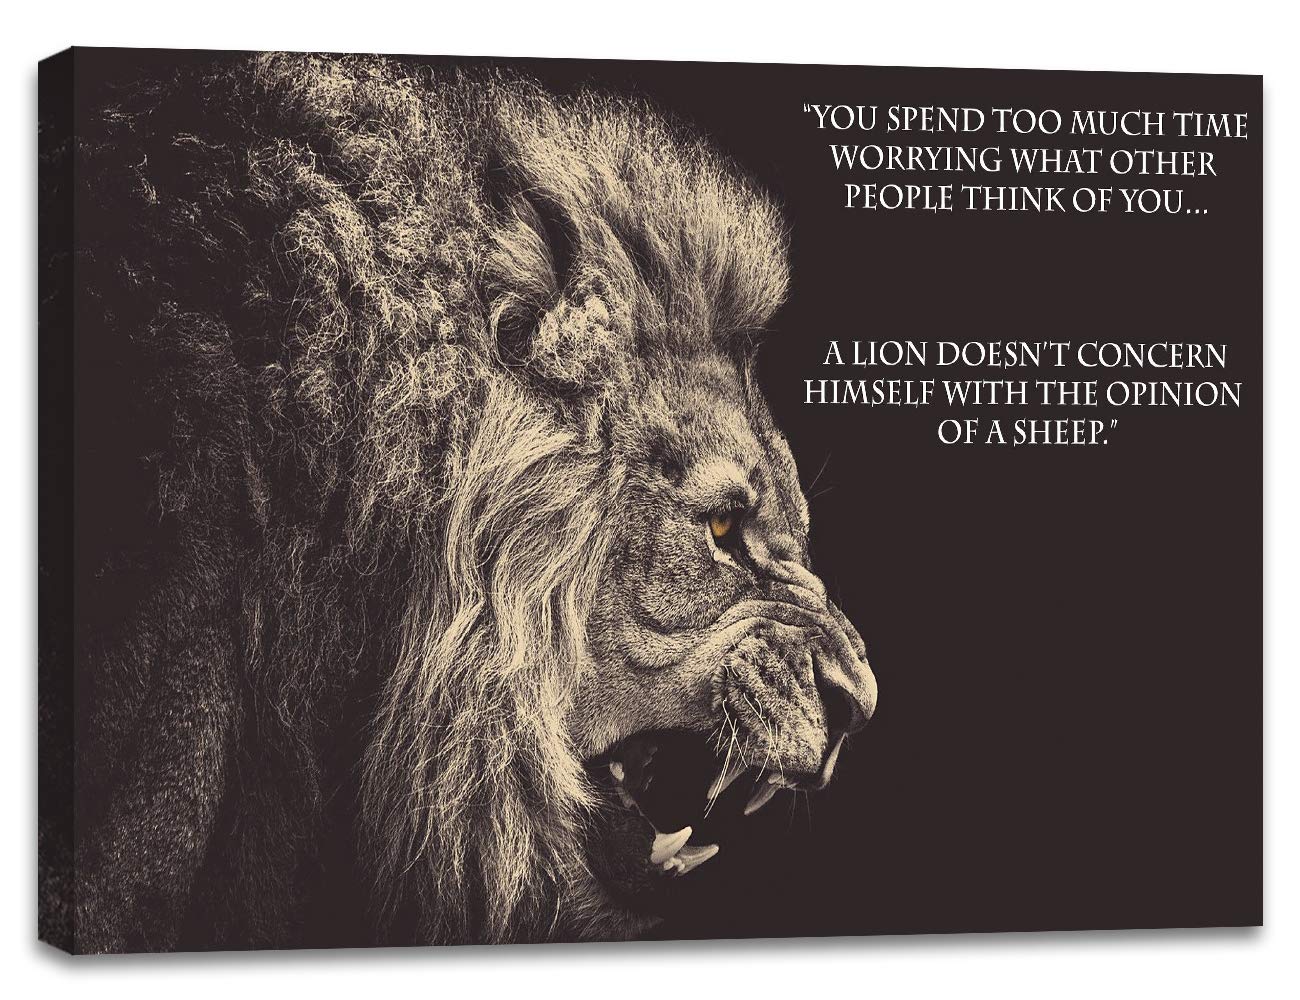 Embrace the Lion Within: Inspiring lion quotes to Awaken Your Courage